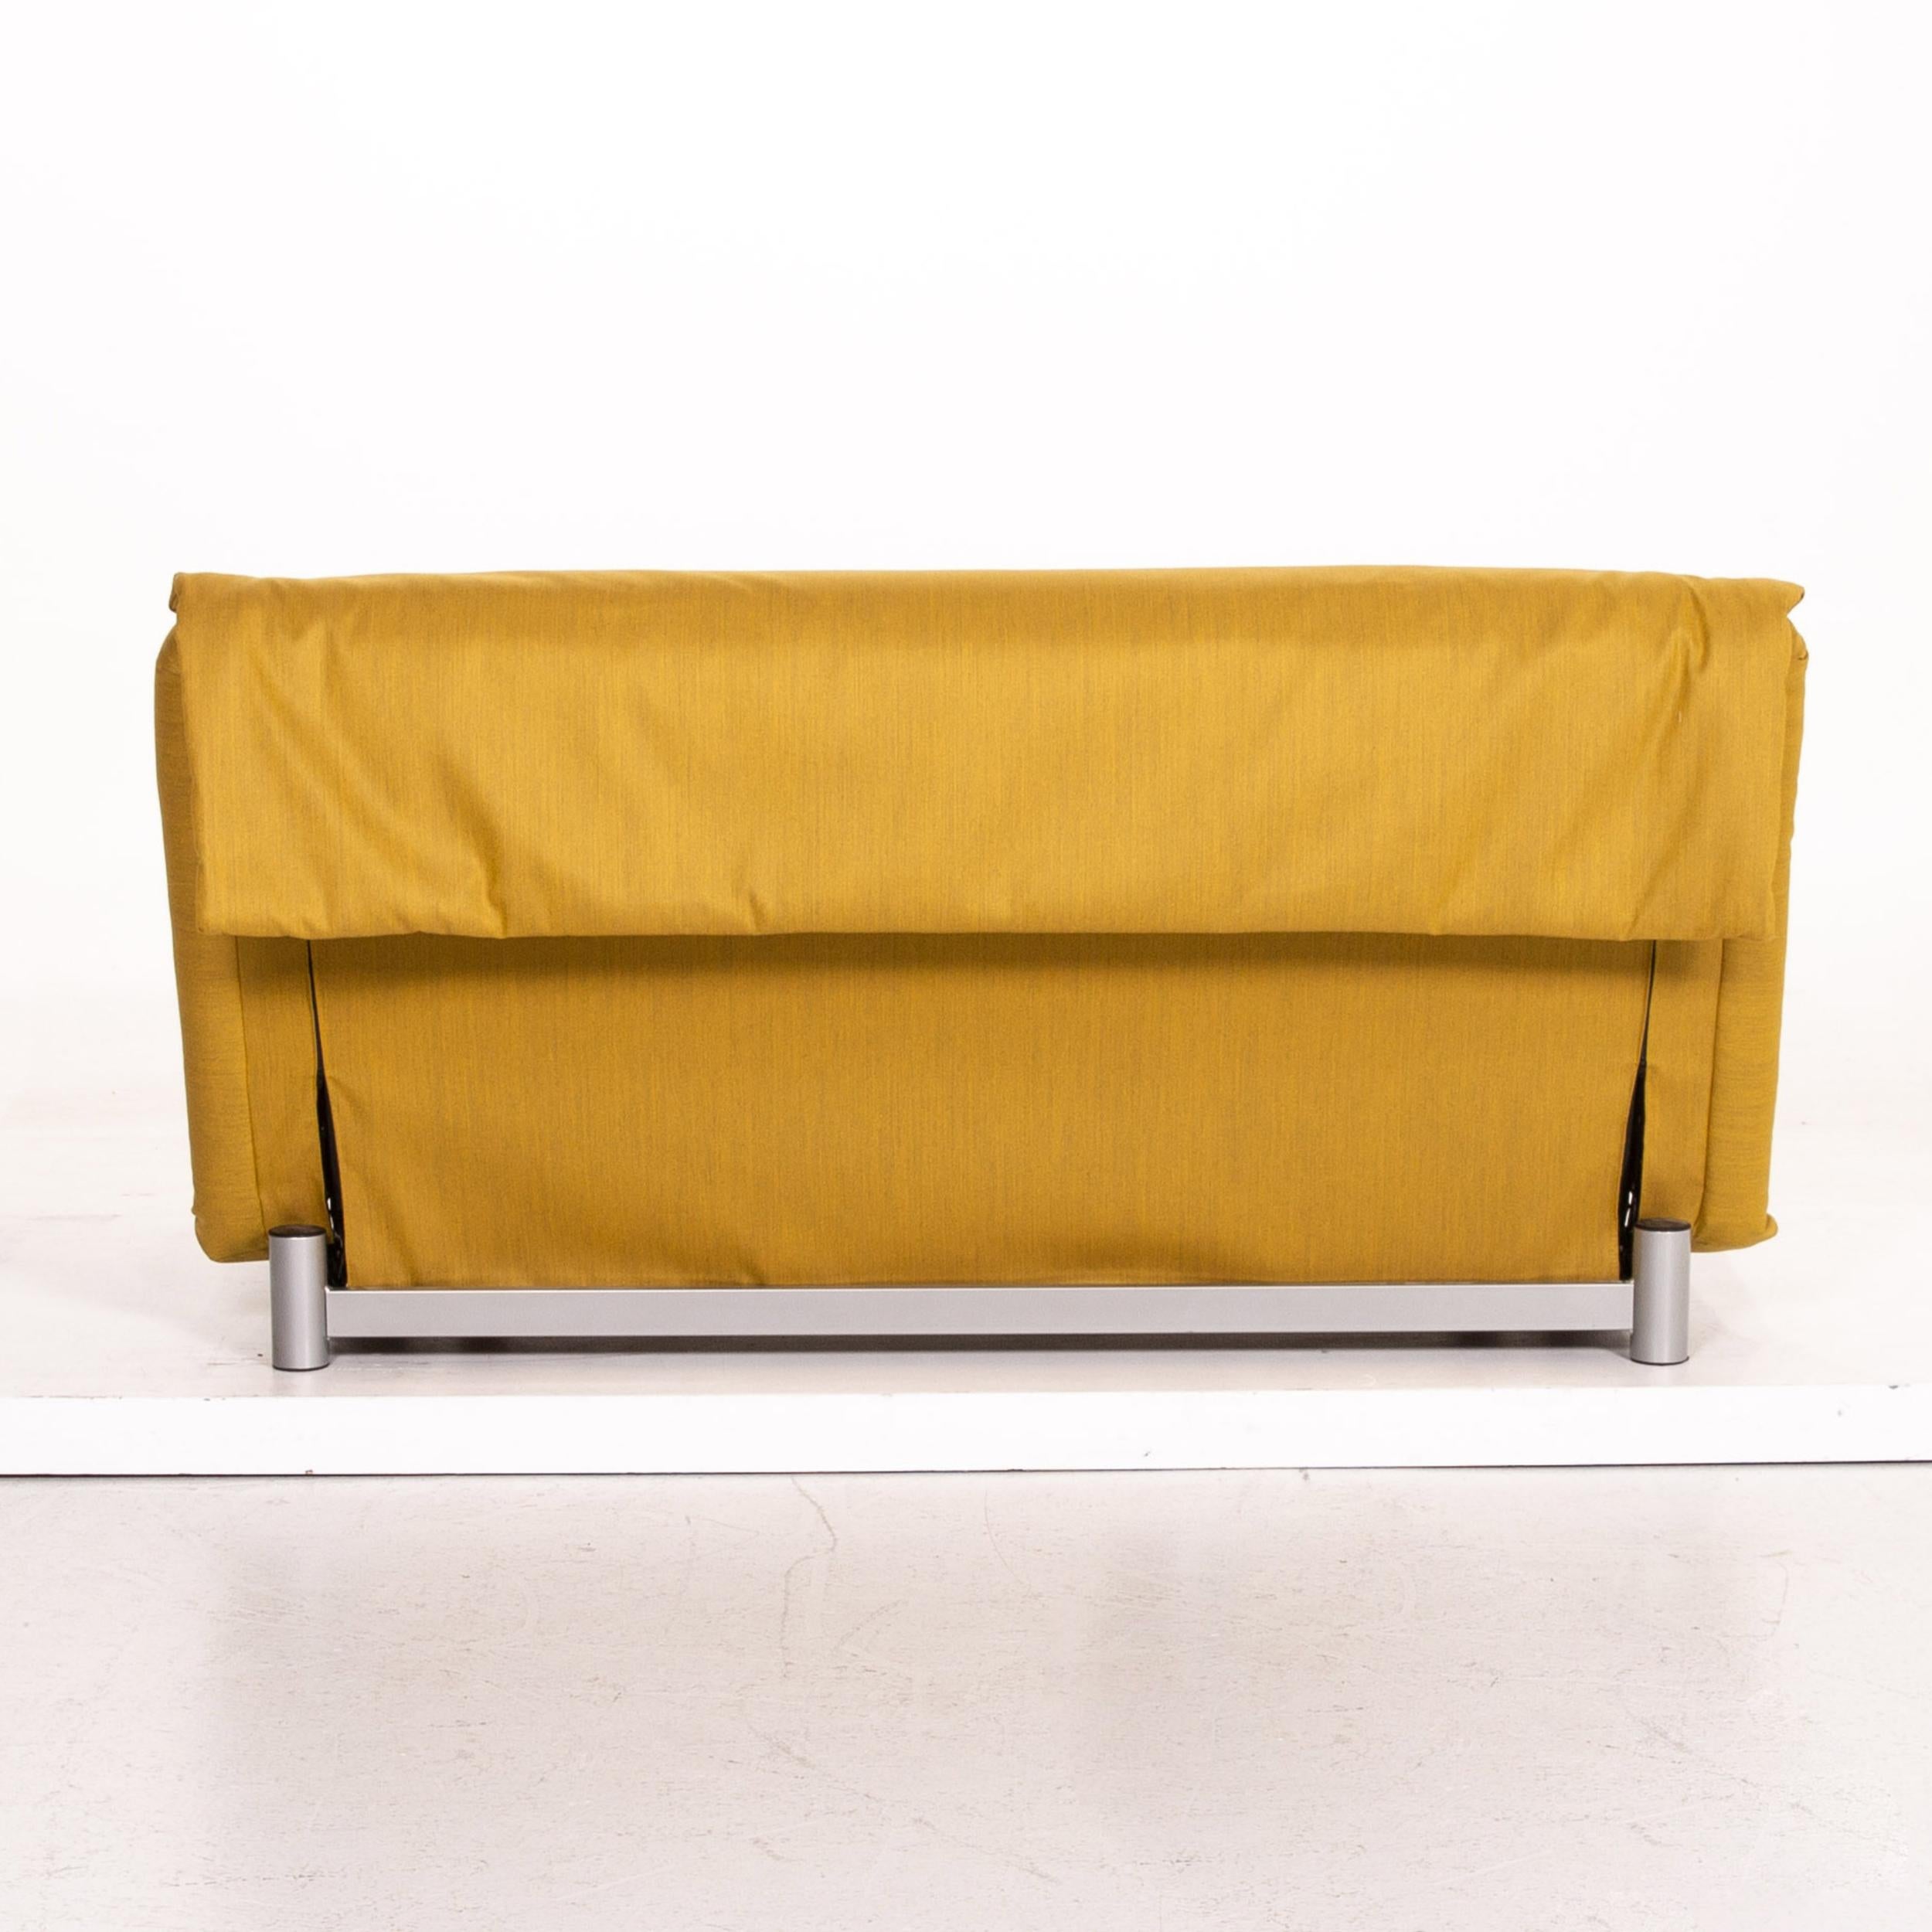 Ligne Roset Multy Fabric Sofa Bed Yellow Two-Seat Sofa Sleep Function Couch 2